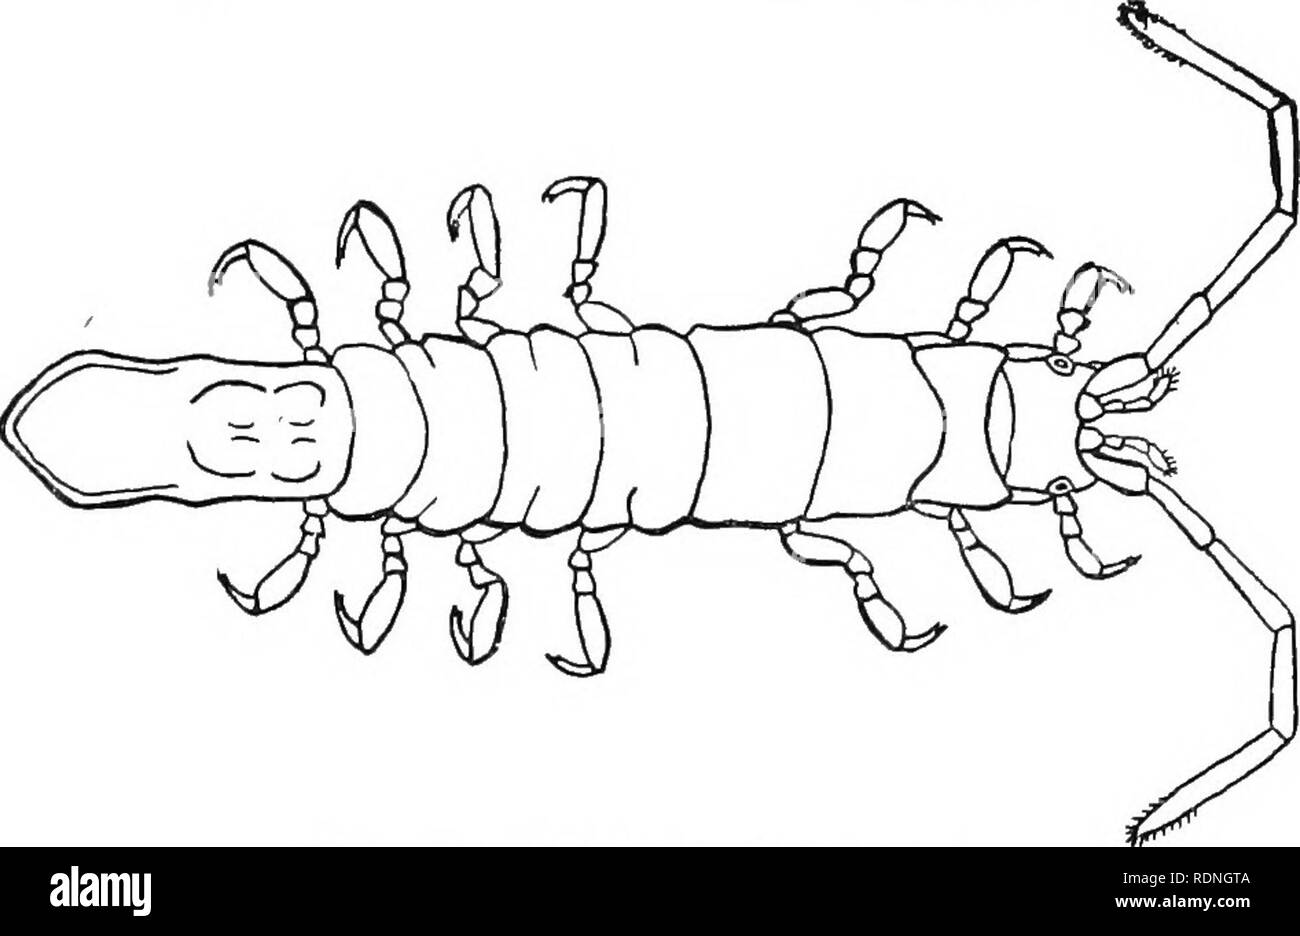 . The Arthrostraca of Connecticut. Malacostraca. No. 26.] ARTHROSTRACA OF CbNNECTICUT. 227 to 25 fathoms, and is always concealed by an adhering layer of mud. It is distinguished from the preceding species by the more rounded lateral margins of the body, the different form of the abdomen, and the absence of tubercles on the lateral portions of the thoracic segments. Erichsonella attenuata (Harger).. Fig. 72. Erichsonella attenuata. 1874. Erichsonia attenuata, Harger, Rept. U. S. Com. Fish, for 1871-2, p. 570, pi. 6, fig. 27. 1880. Erichsonia attenuata, Harger, ibid., for .1878, p. 356, pis. 6  Stock Photo